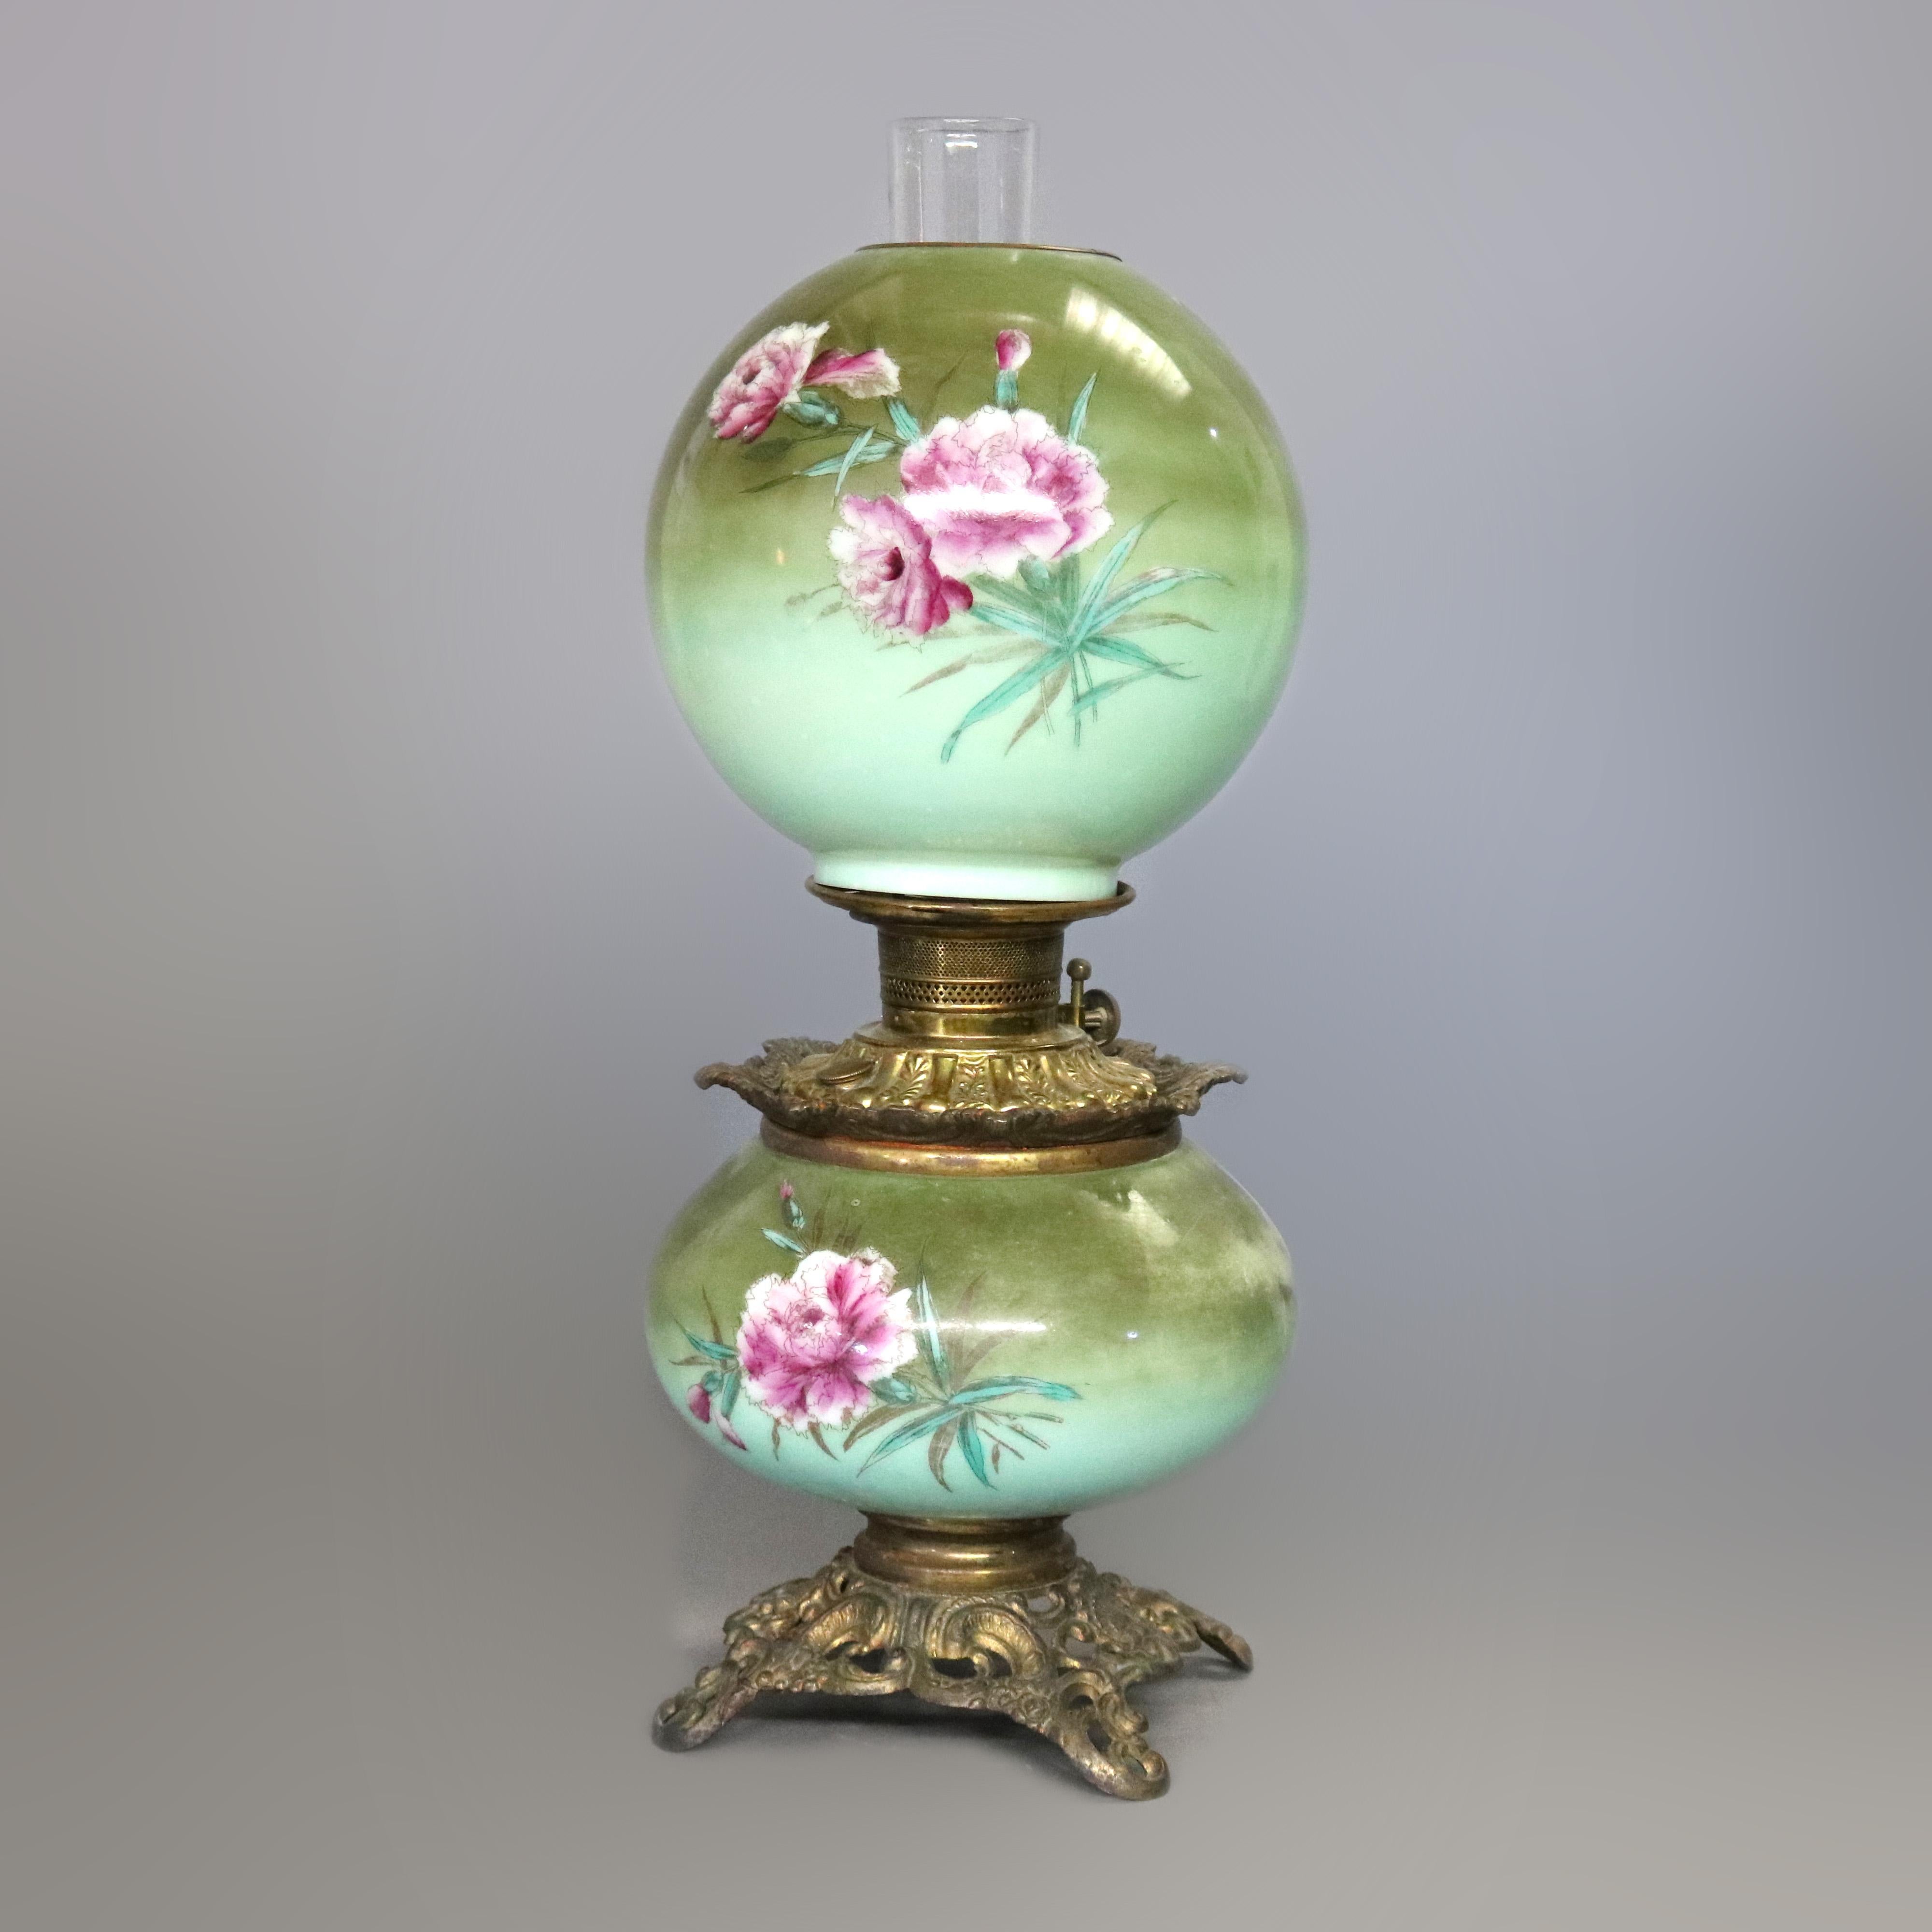 An antique Victorian Gone with the wind oil table lamp offers floral hand-painted glass globe and font on foliate cast base, fully operating and non-converted oil lamp, c1890

Measures - 21.75'' H x 8.25'' W x 8.25'' D.